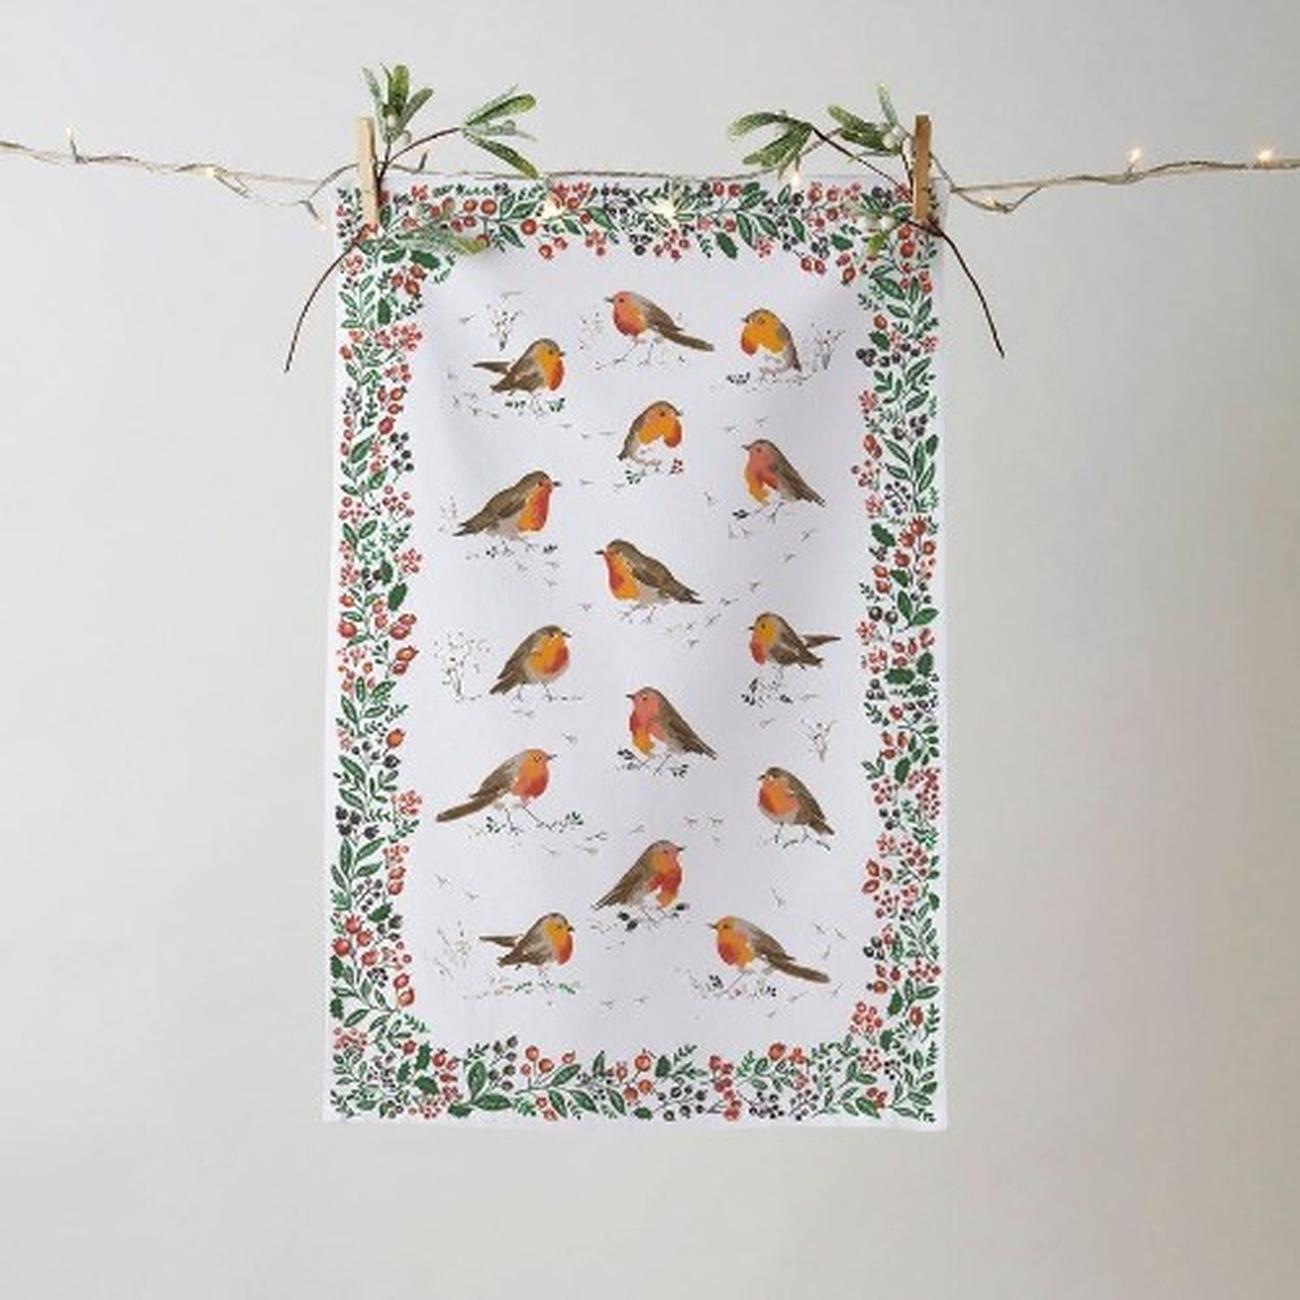 uw-robins-and-berry-white-tea-towel - Ulster Weaver Recycled Cotton Robins & Berry Tea Towel